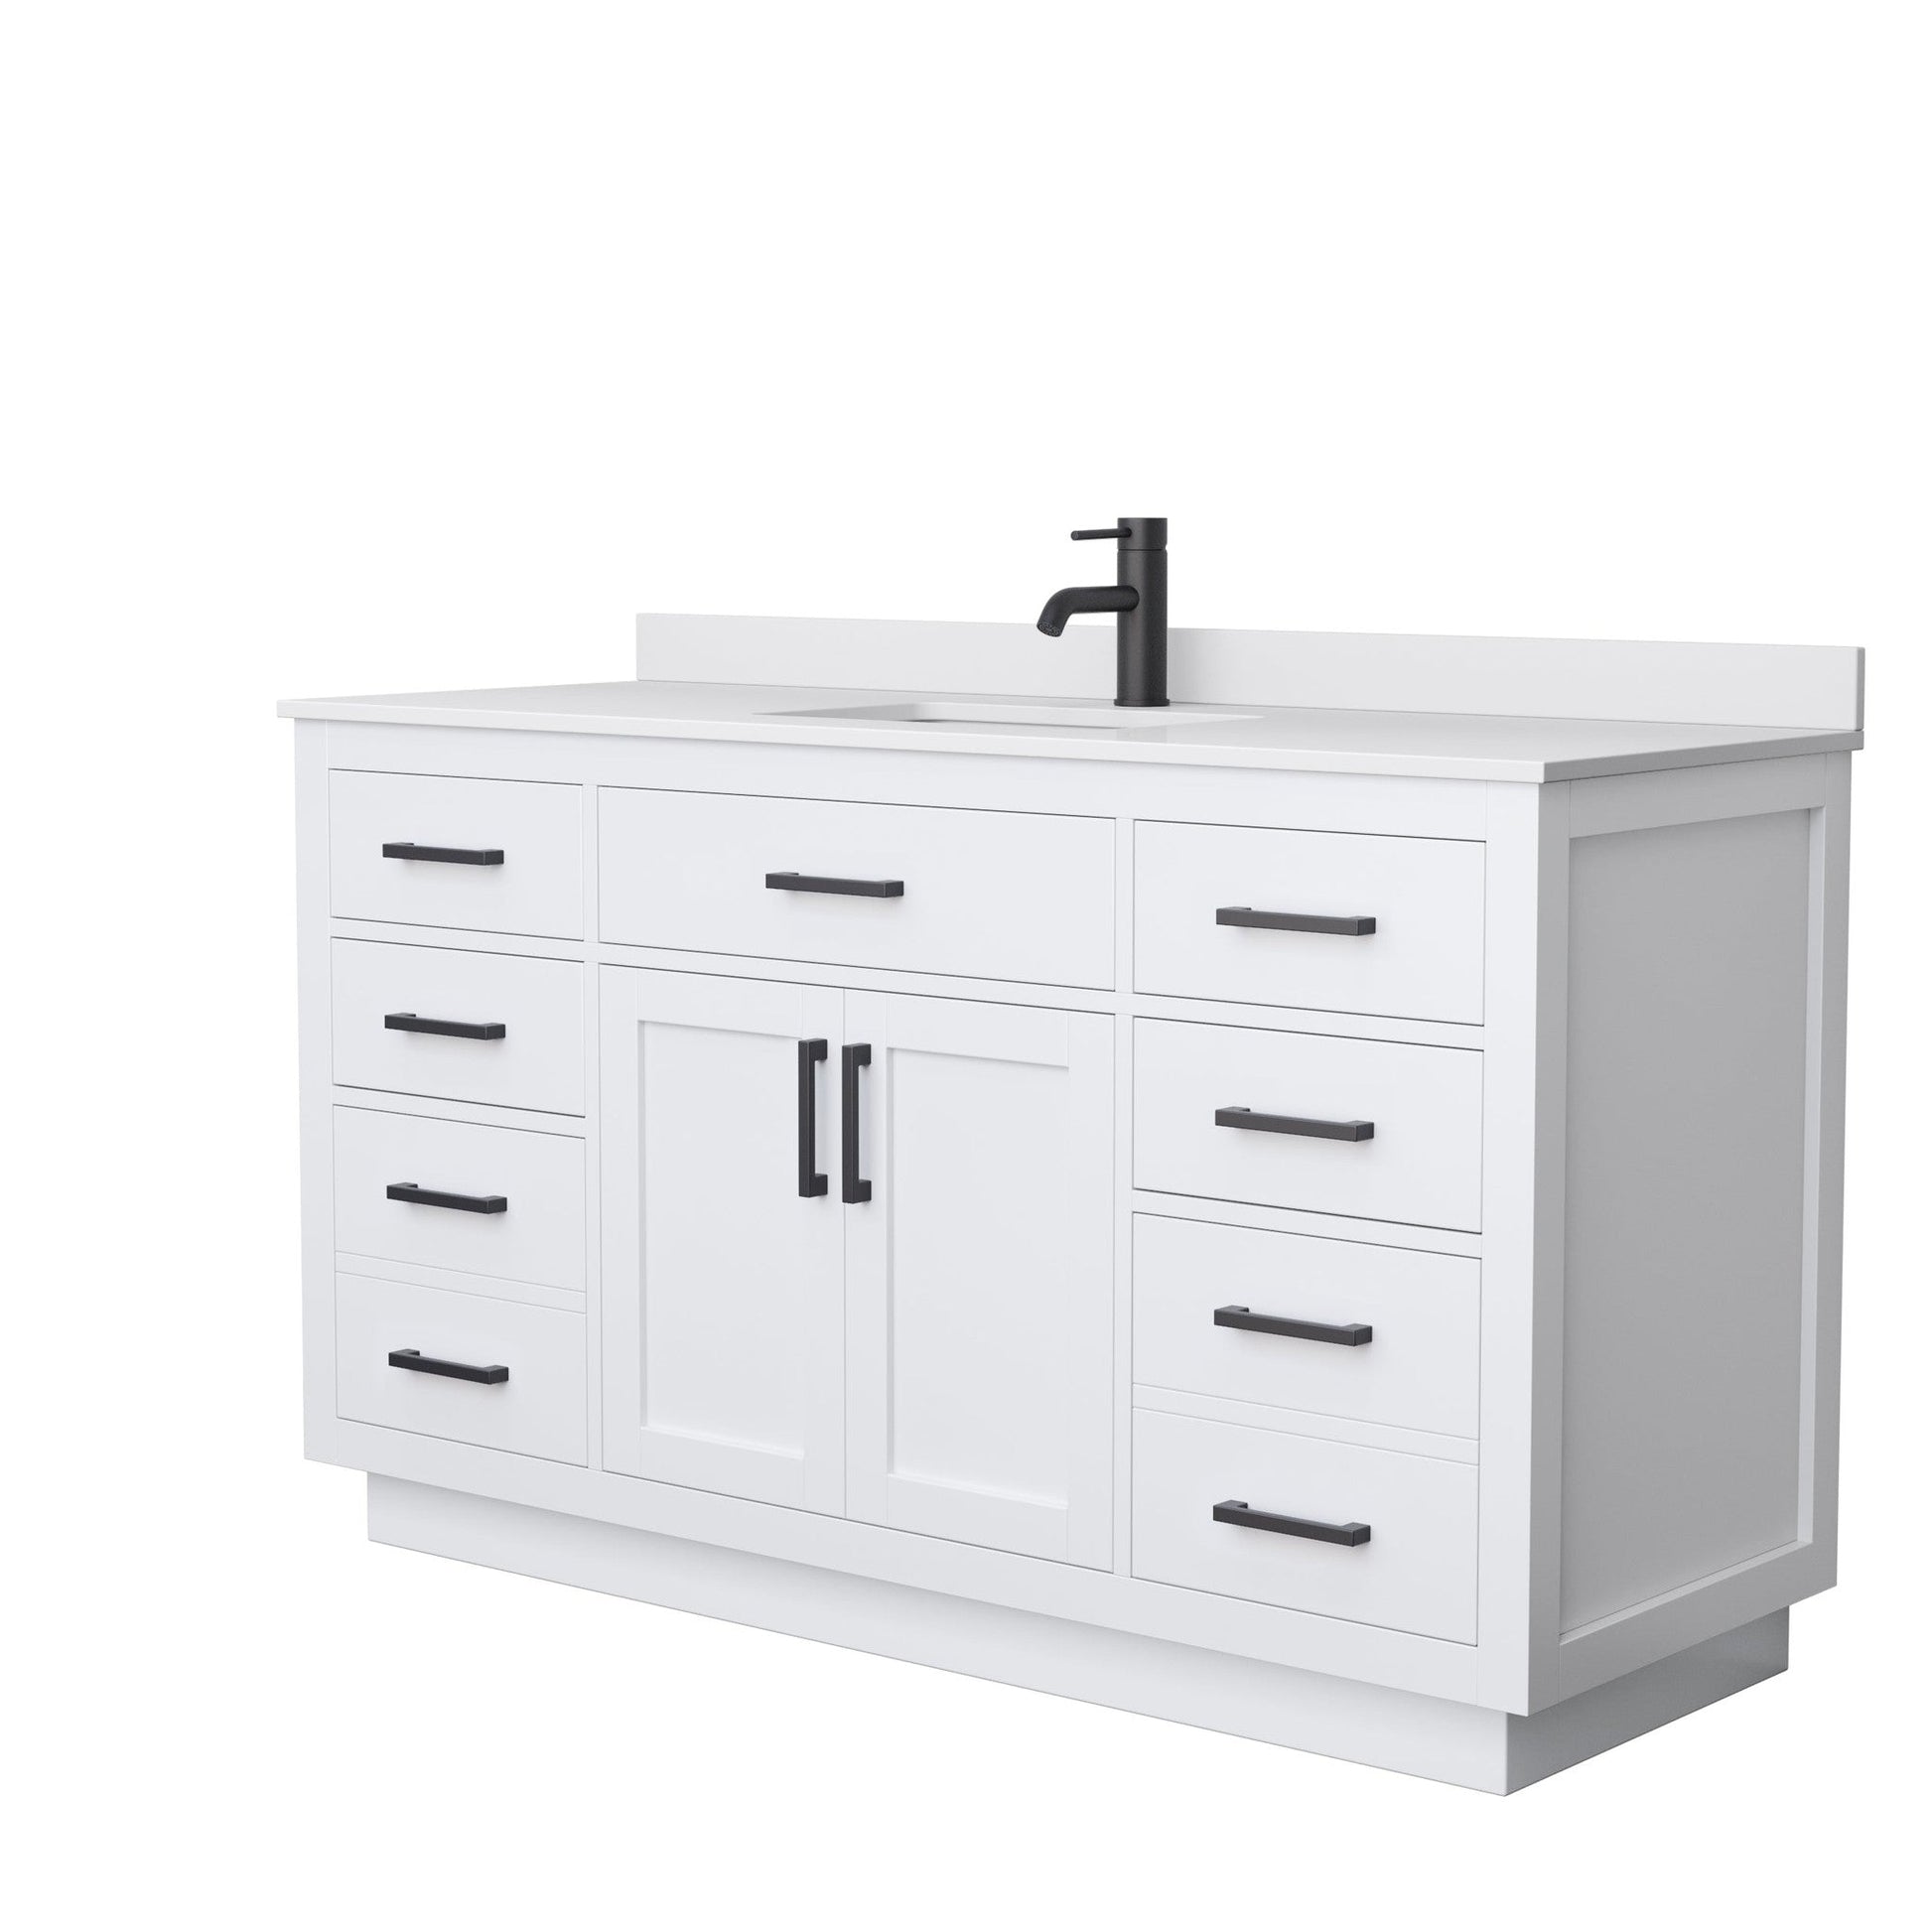 Beckett 60" Single Bathroom Vanity With Toe Kick in White, White Cultured Marble Countertop, Undermount Square Sink, Matte Black Trim